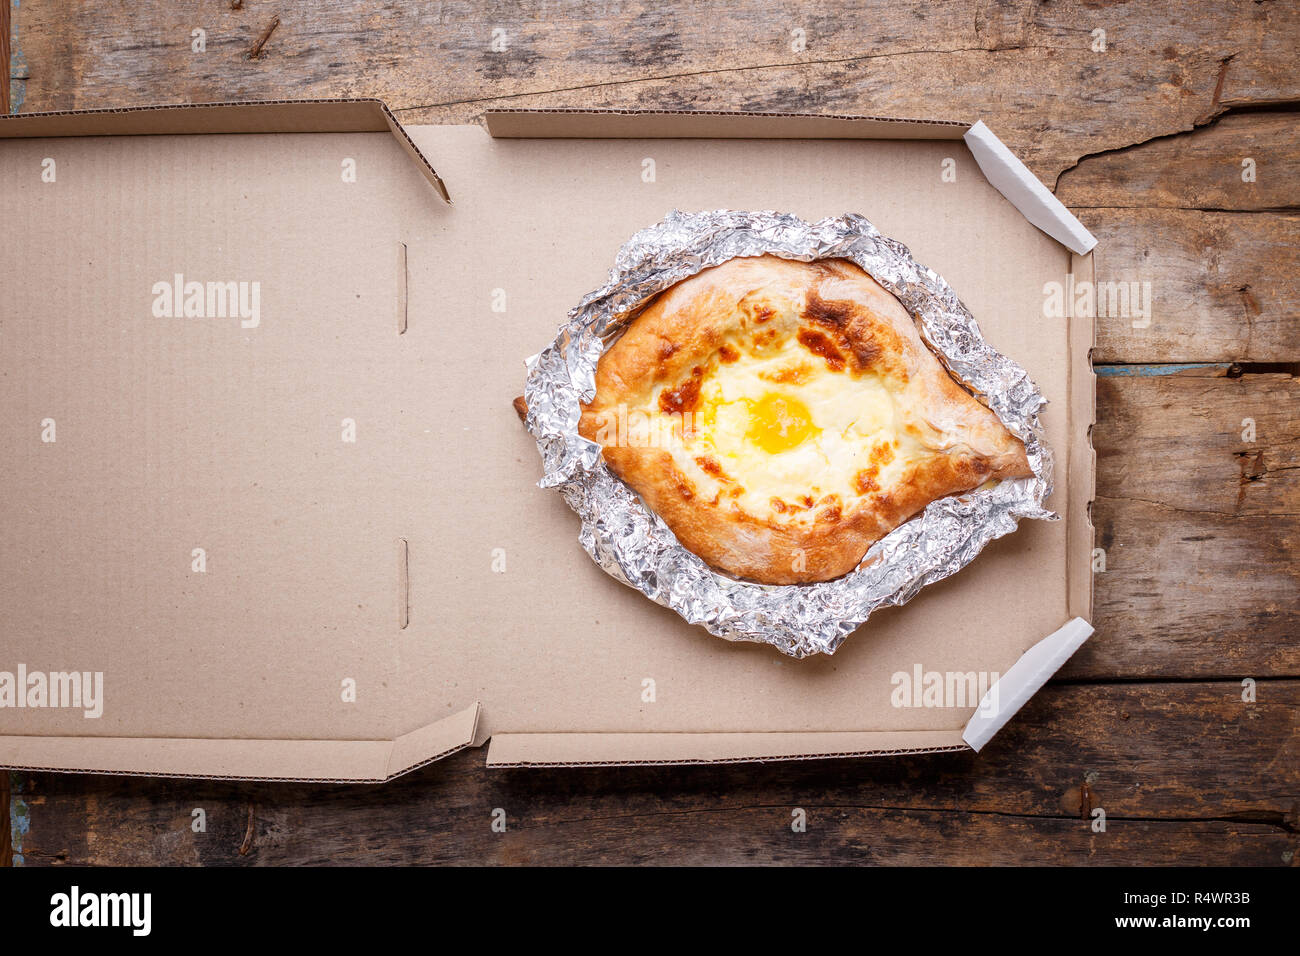 Adjarian open khachapuri with cheese and egg on wooden board. Traditional Caucasian take away and street food Stock Photo